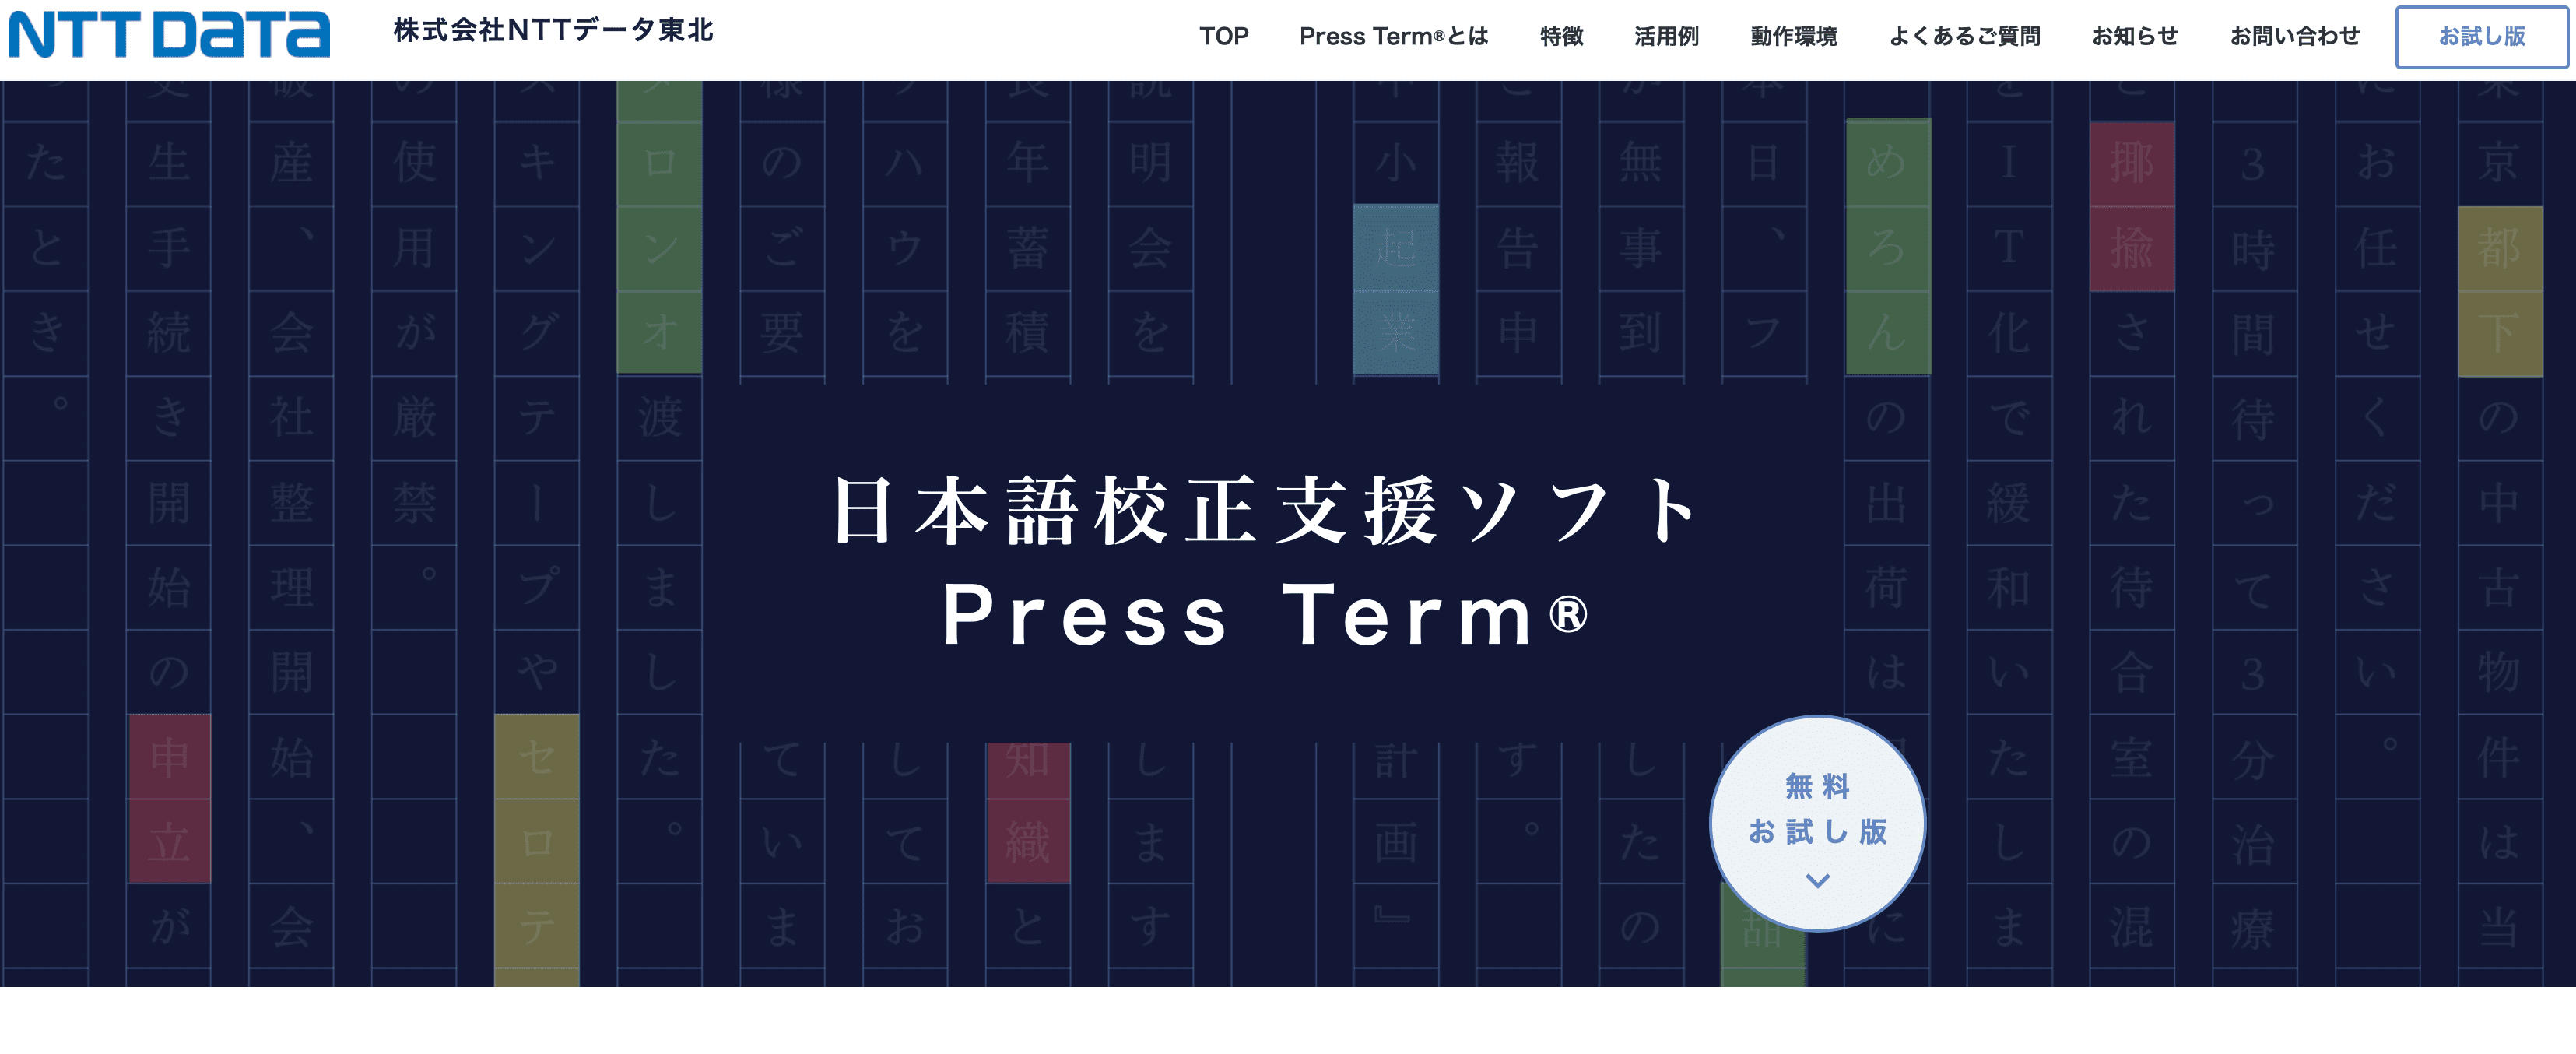 「Press Term」 参考サイト：https://www.nttdata-tohoku.co.jp/solution/corporate/proofreading.html